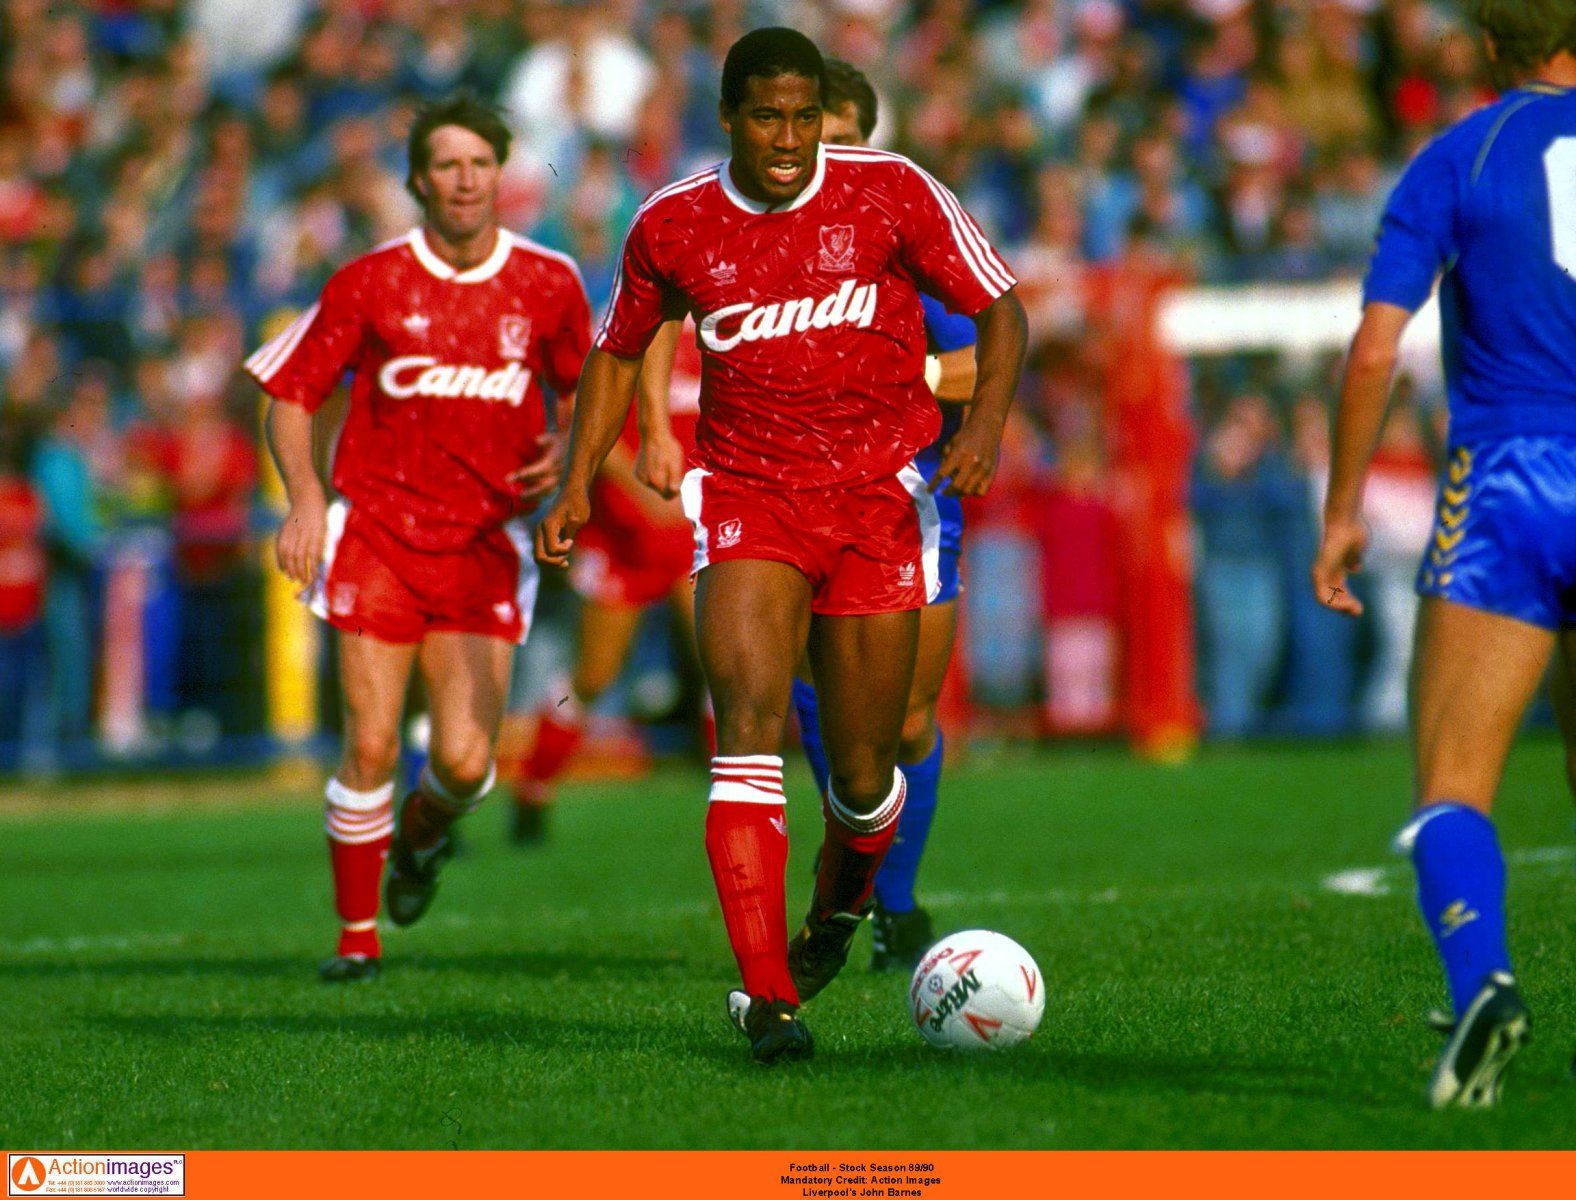 Shockwaves: The £900,000 Liverpool legend who would walk into Klopp's squad | The ...1576 x 1200